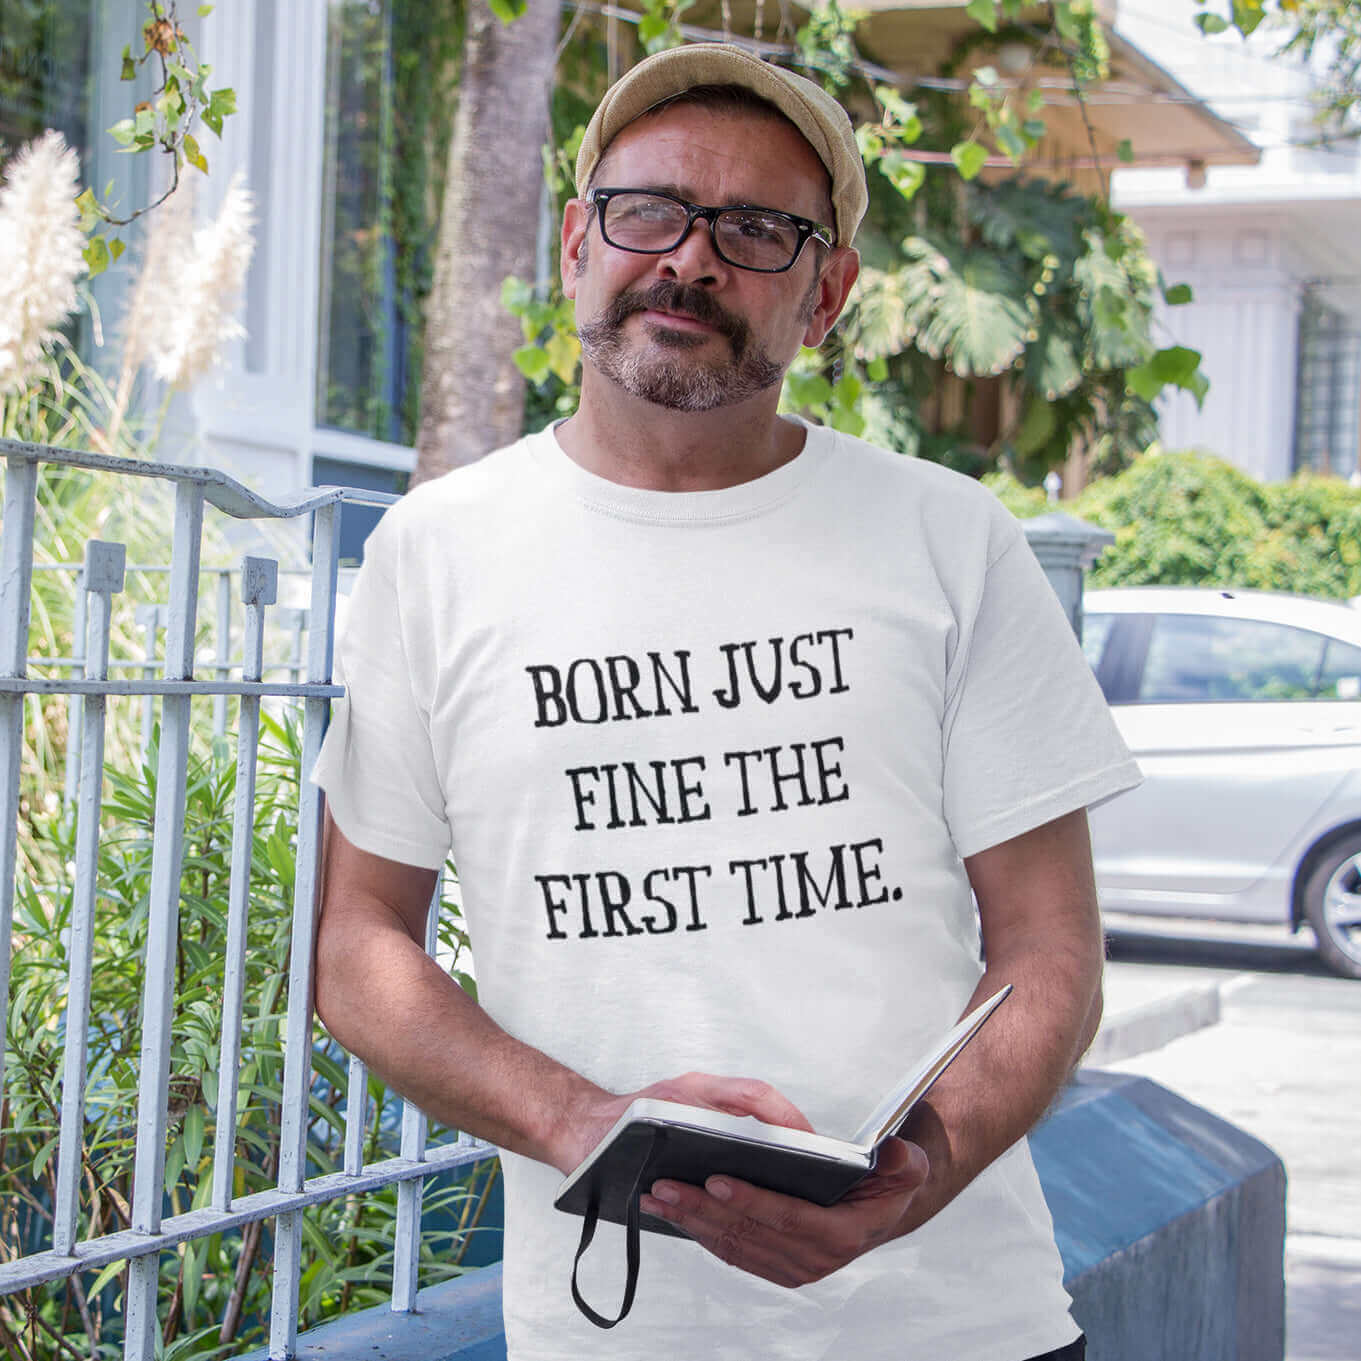 Man wearing white t-shirt with the words Born just fine the first time printed on the front.